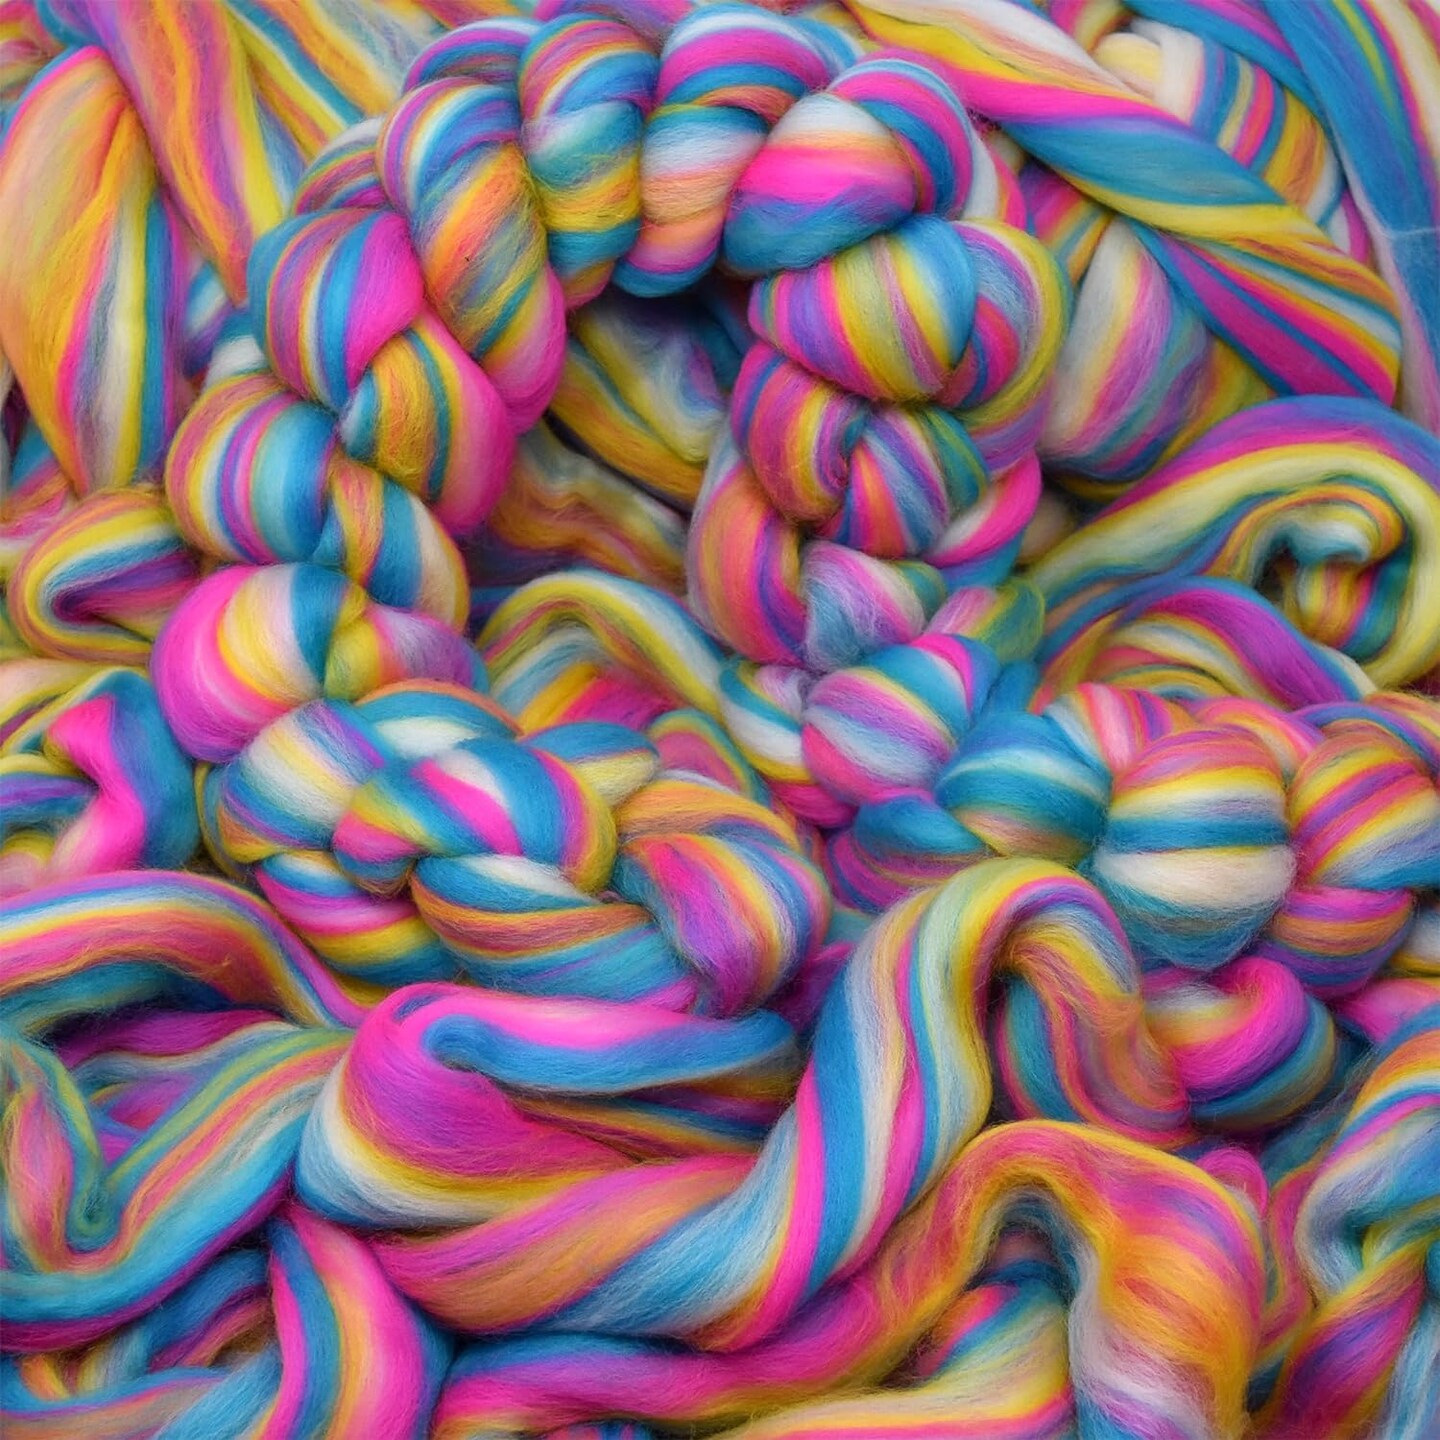 Fiesta Colorful Merino Wool Combed Top Roving for Spinning and Felting. Limited Edition. Malibu